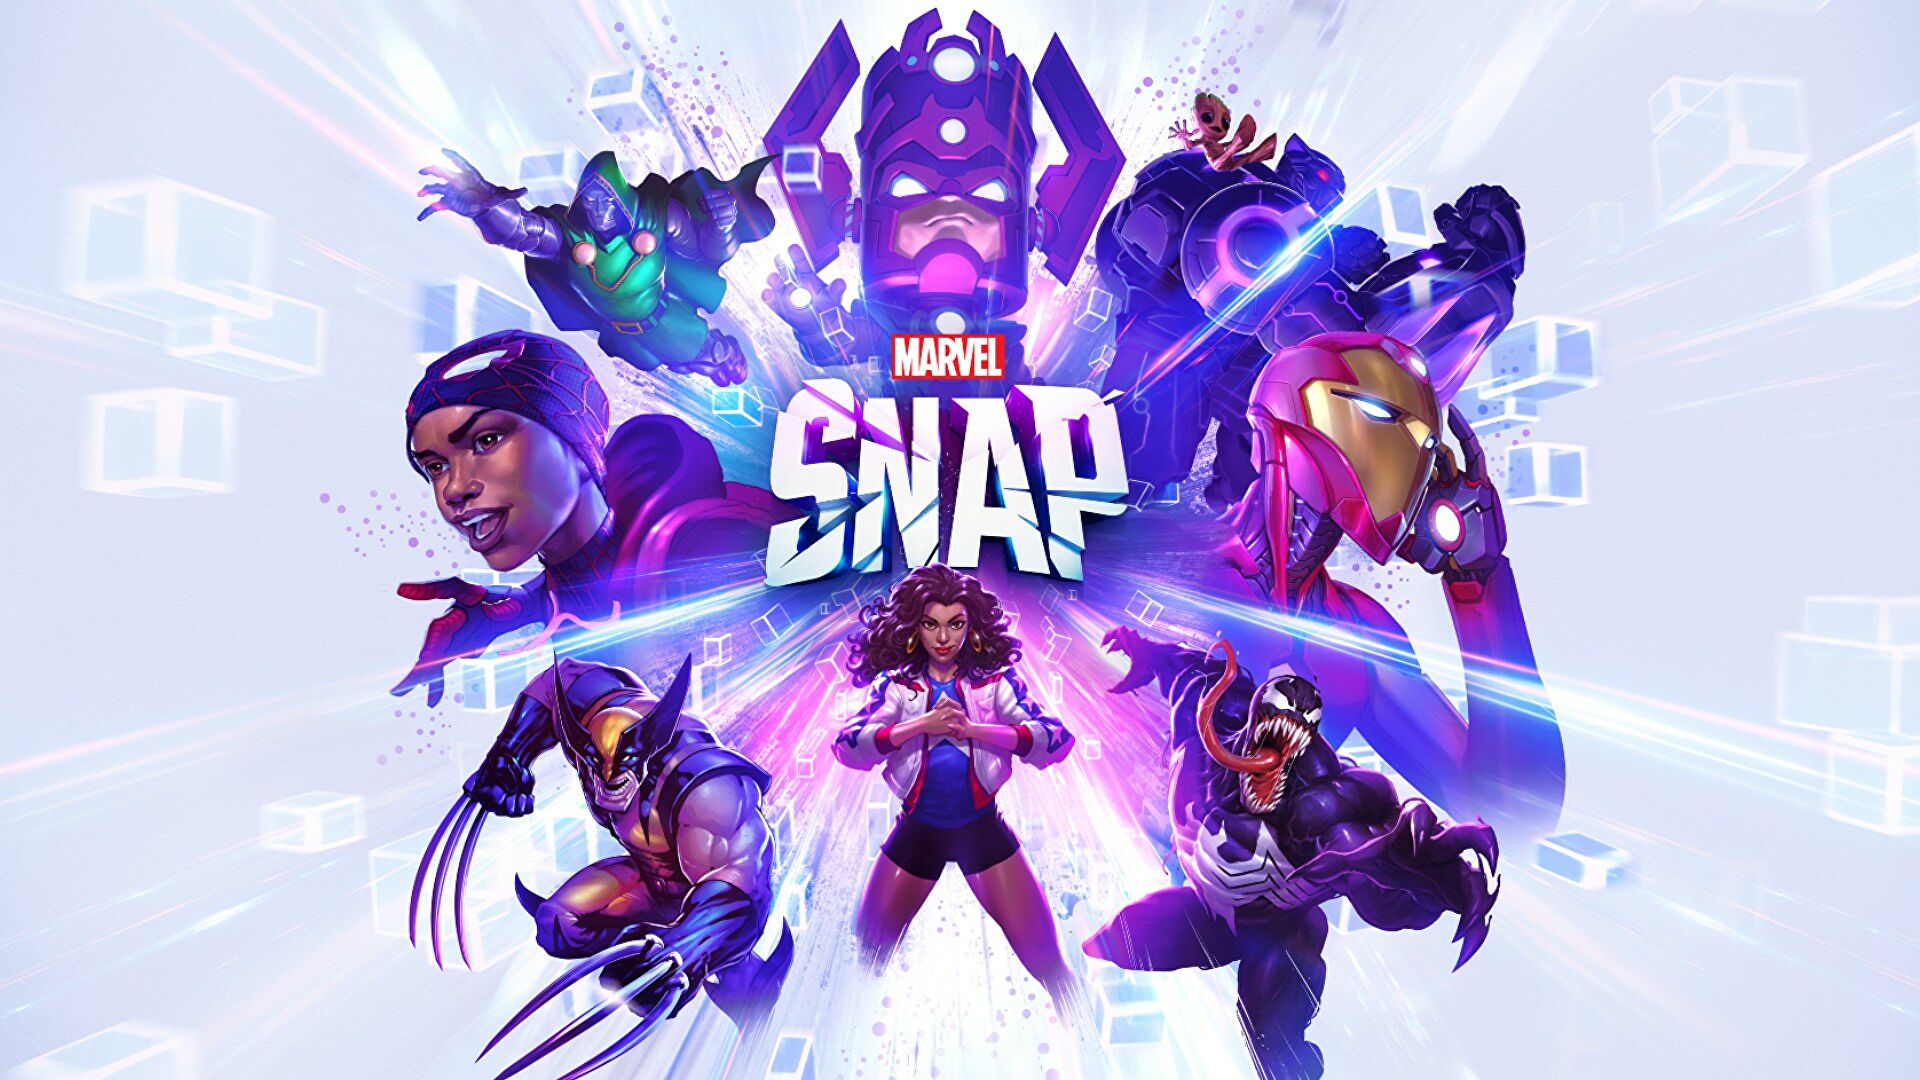 Marvel Snap will play its multiverse of superhero cards this October. Rock Paper Shotgun